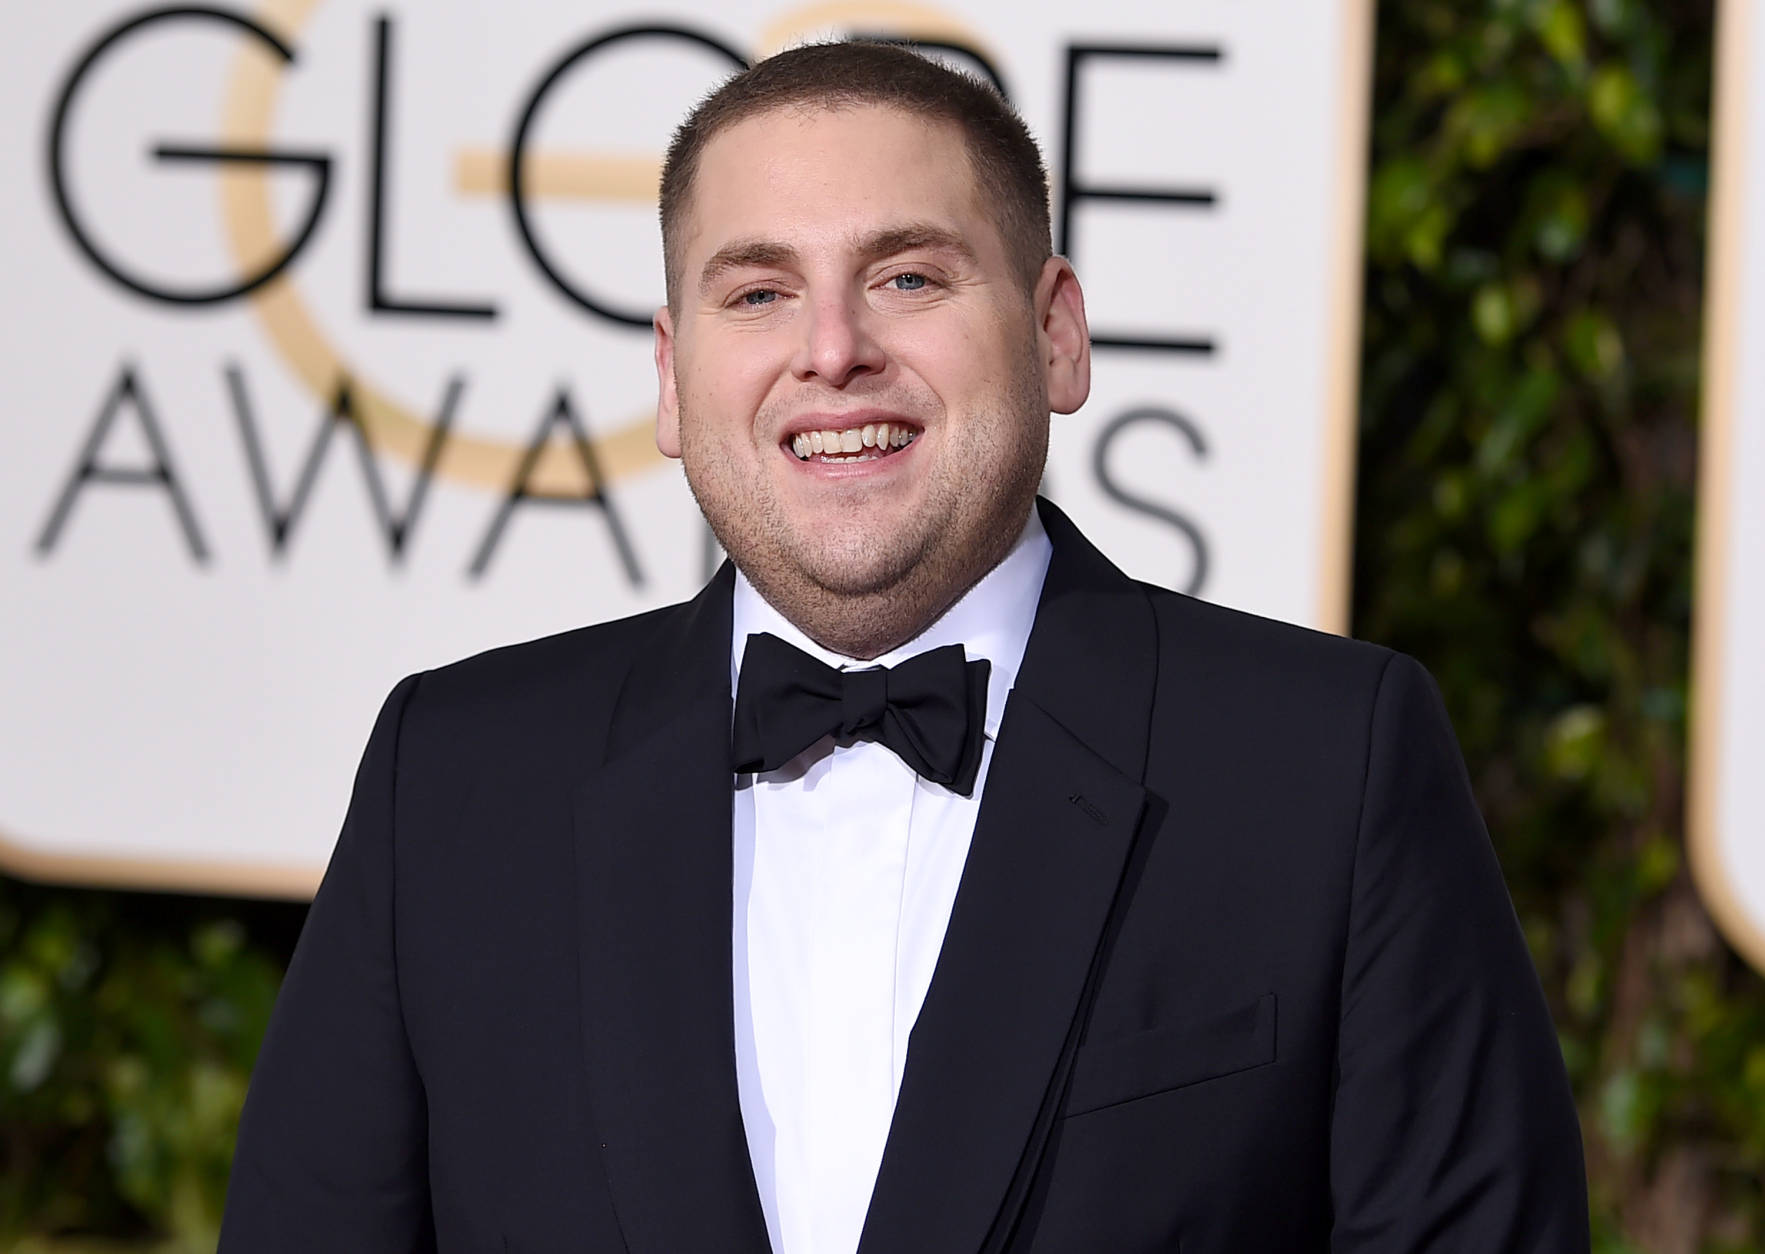 Jonah Hill arrives at the 73rd annual Golden Globe Awards on Sunday, Jan. 10, 2016, at the Beverly Hilton Hotel in Beverly Hills, Calif. (Photo by Jordan Strauss/Invision/AP)